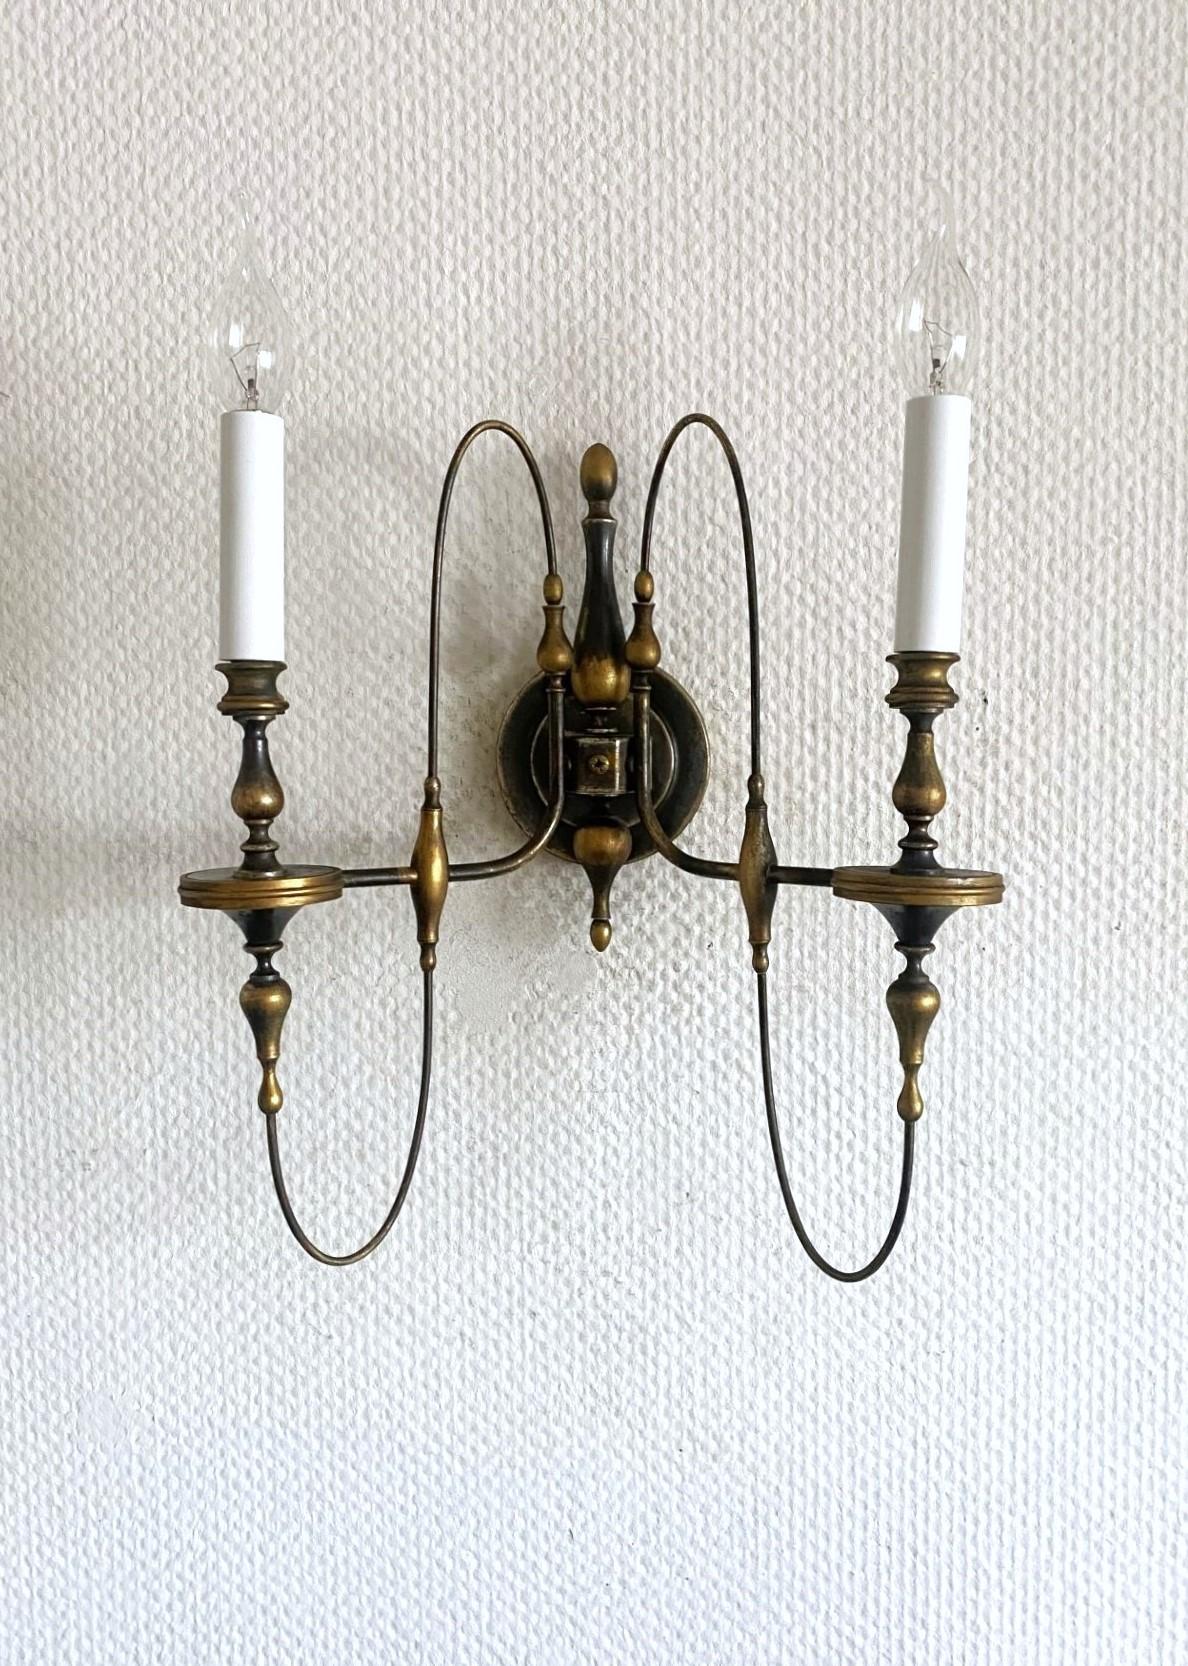 Rare Pair of Italian Brass Wall Sconces by Gaetano Sciolari, Italy 1950s, Marked In Good Condition For Sale In Frankfurt am Main, DE